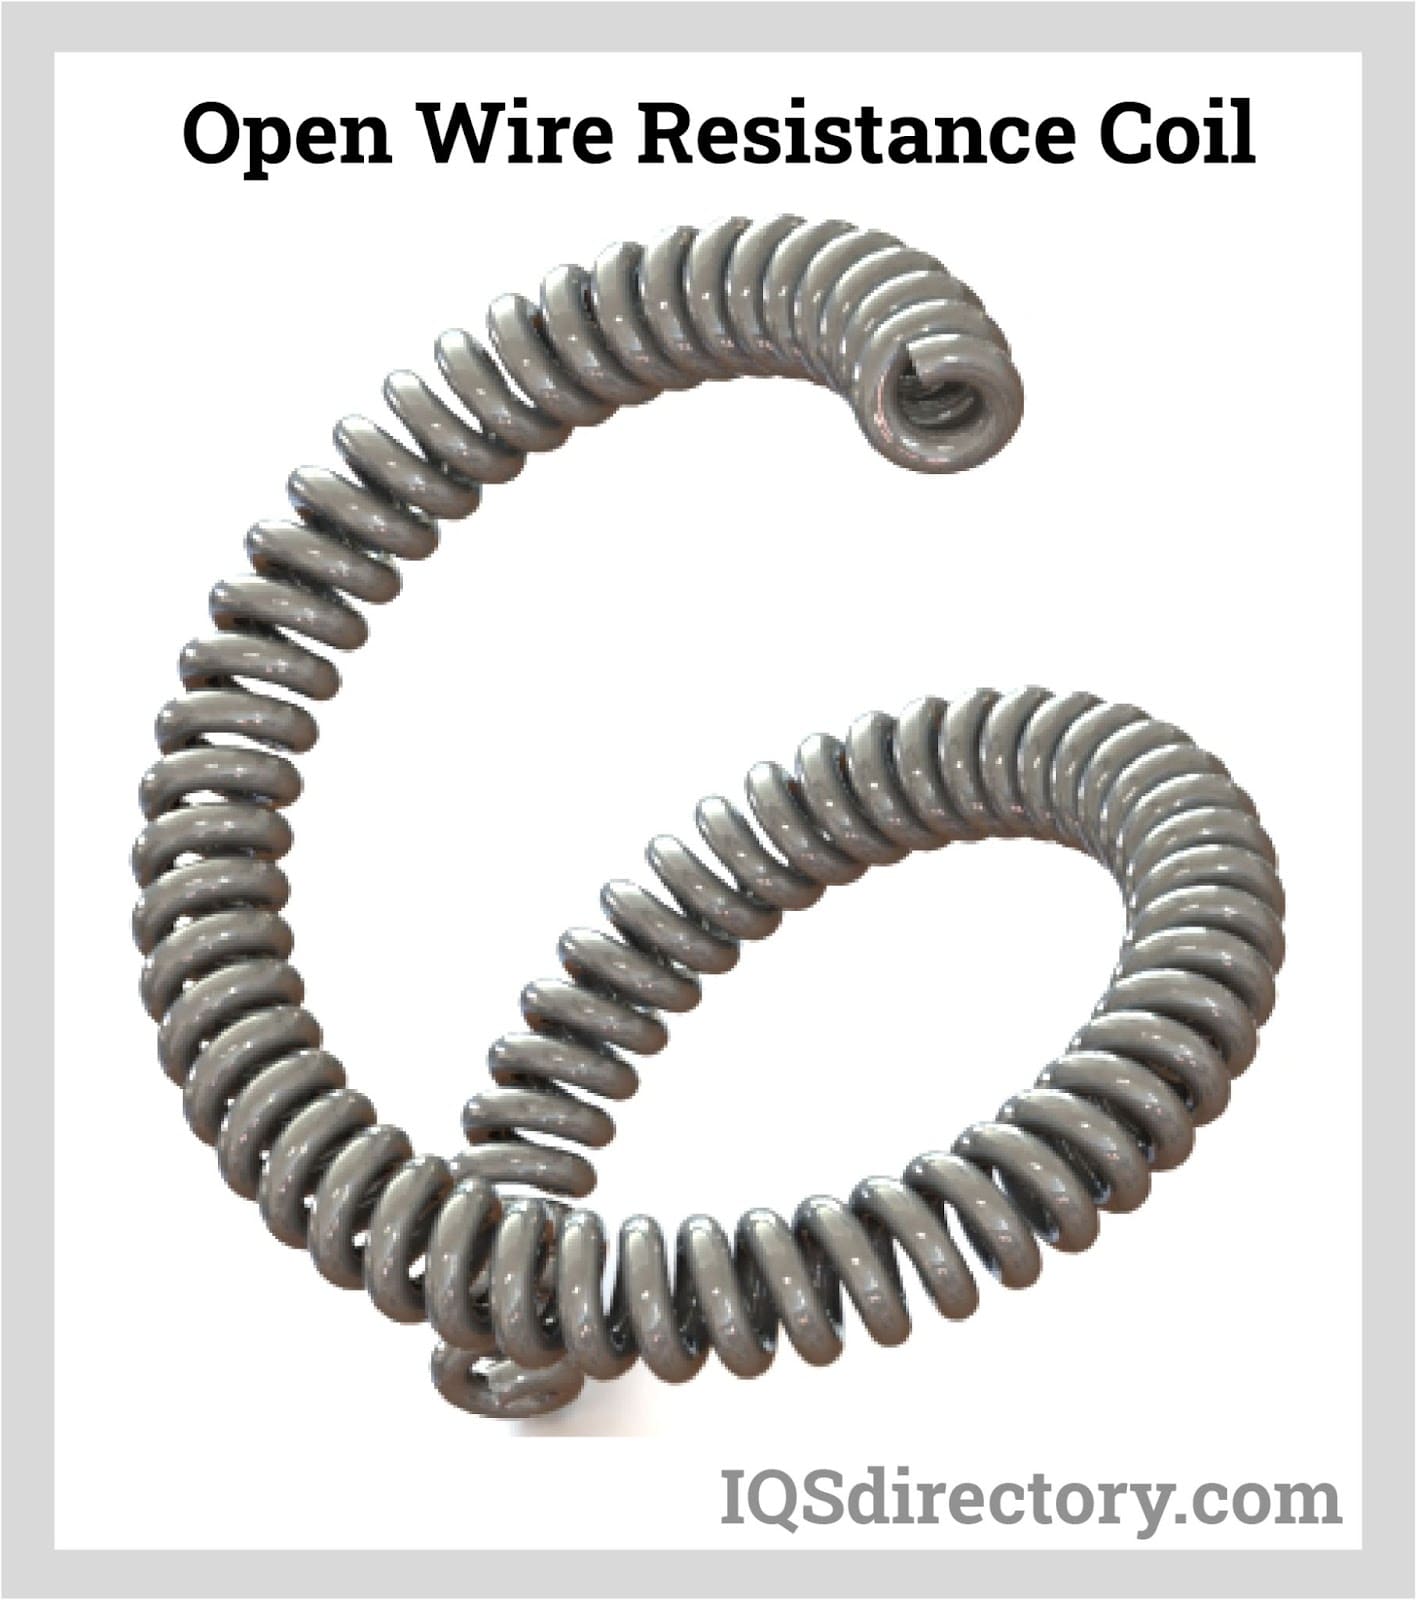 Open Wire Resistance Coil